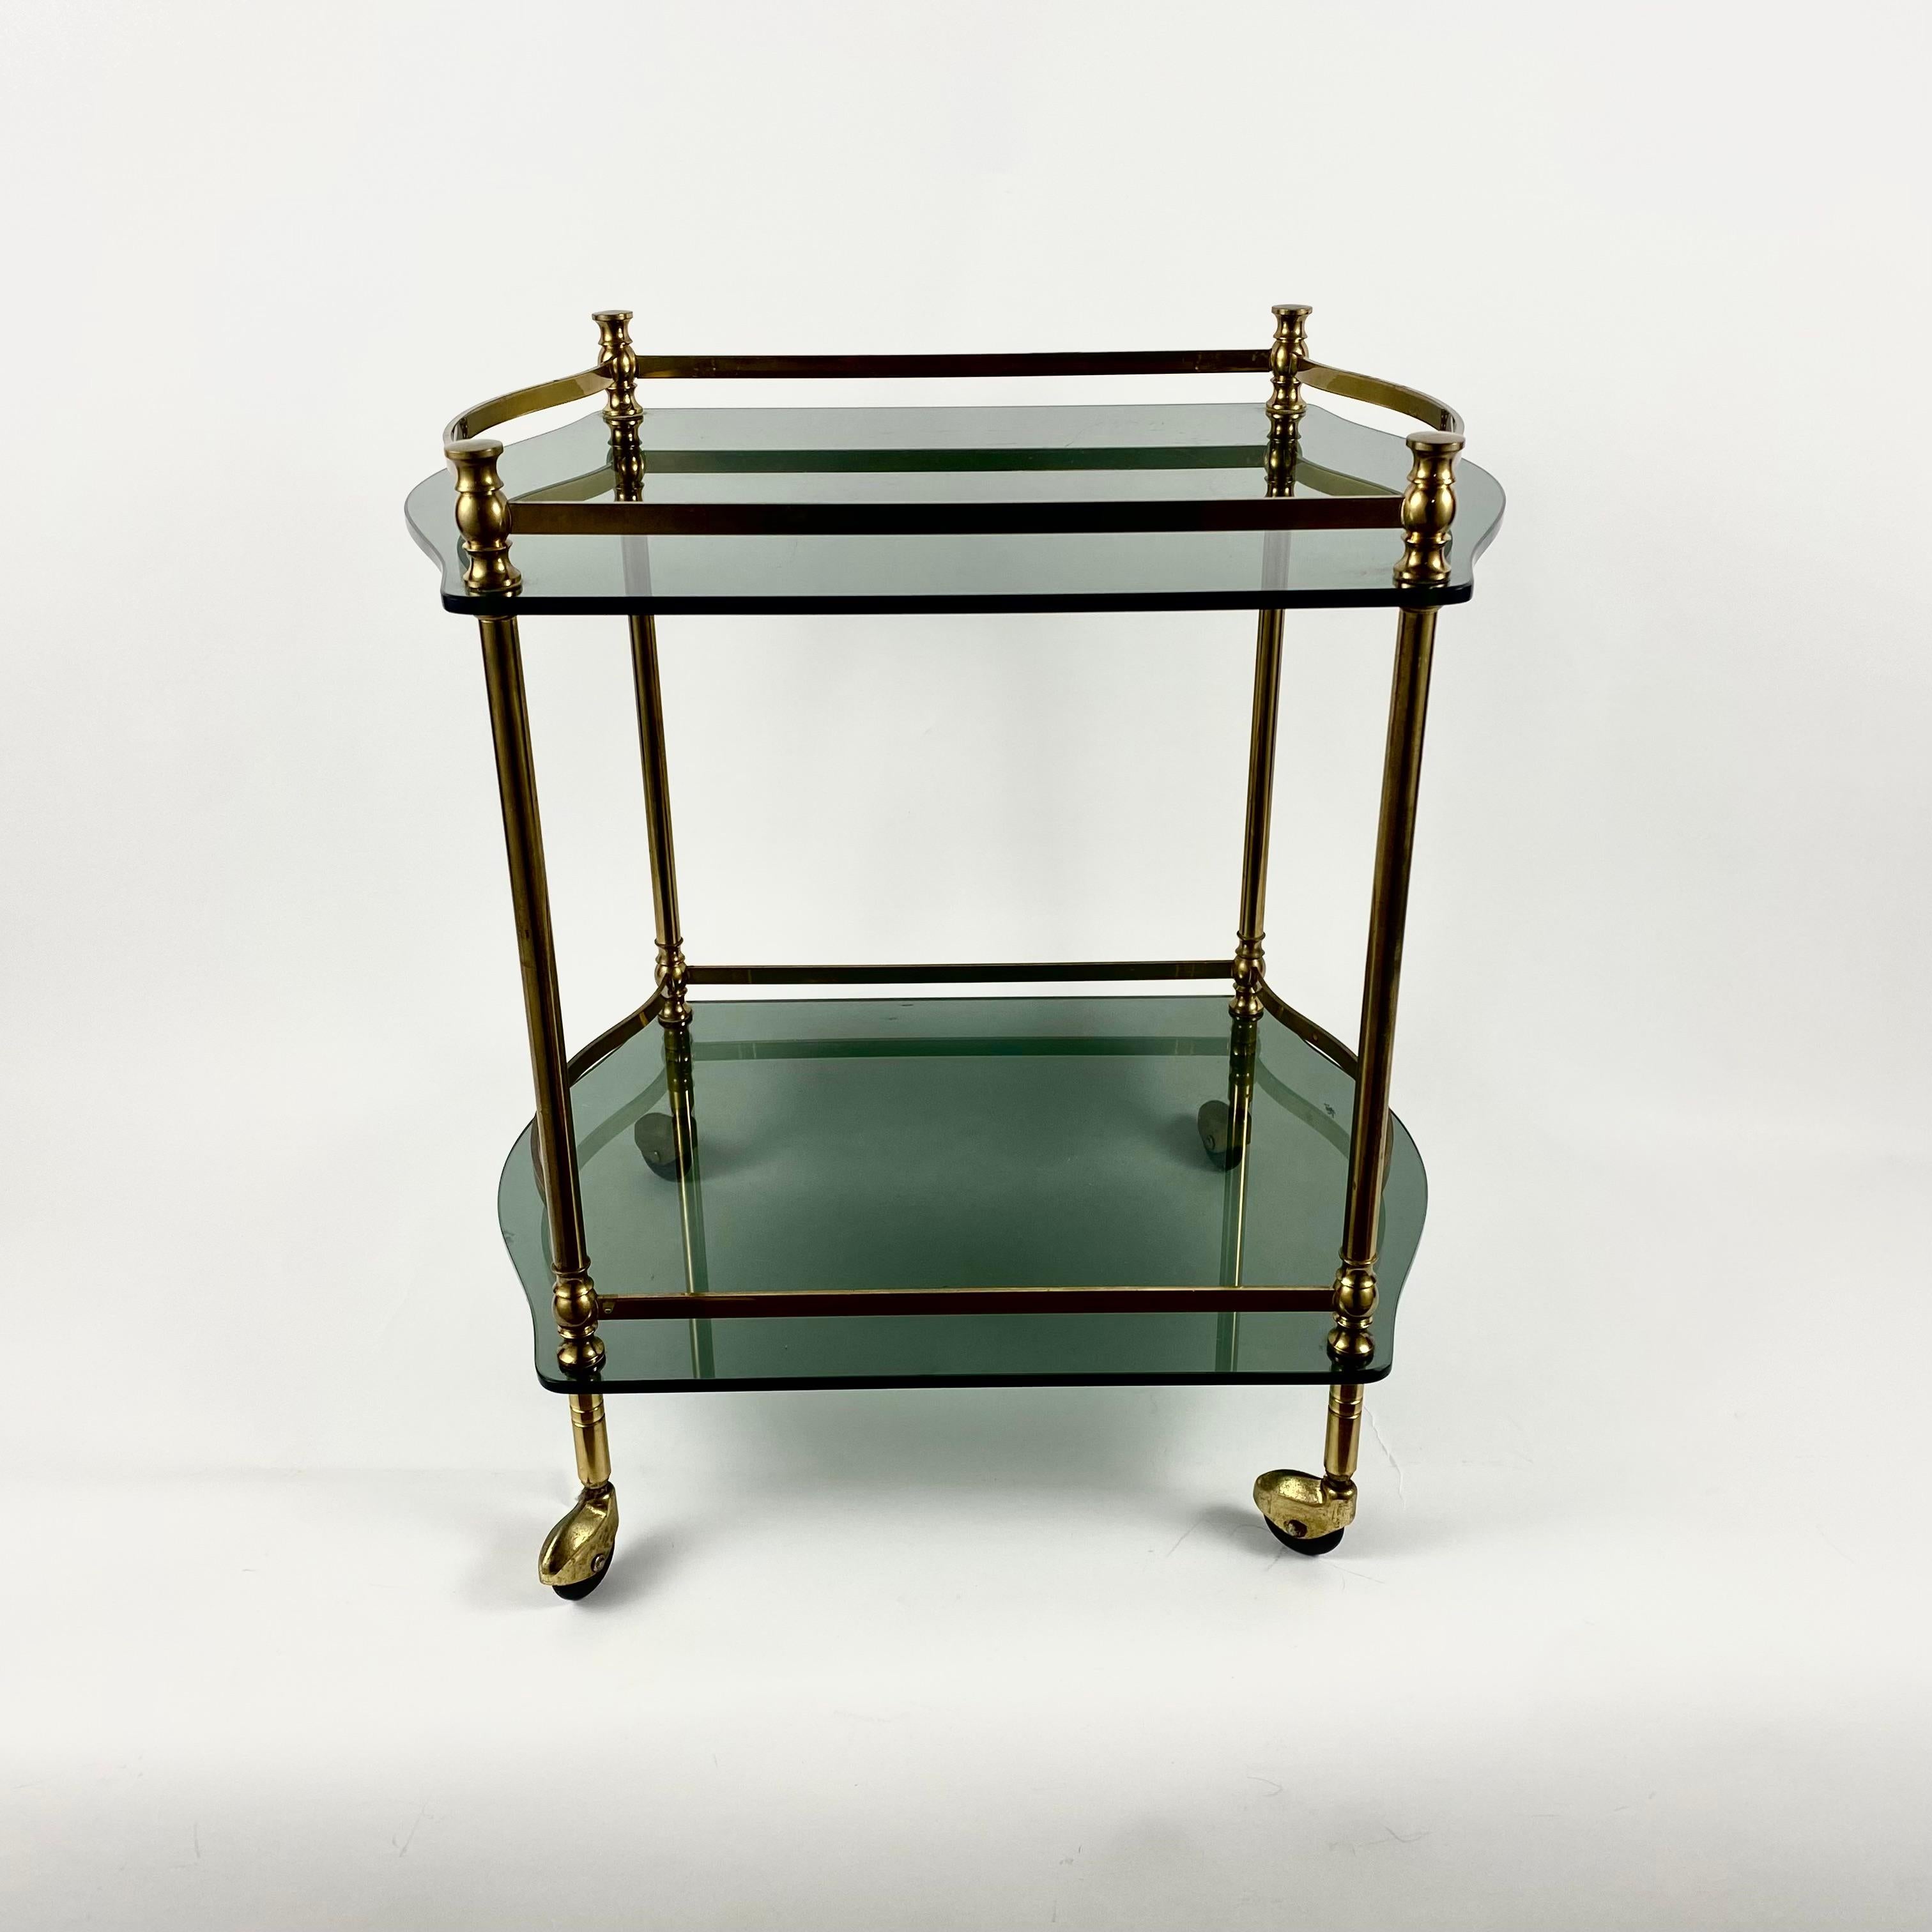 Functional and stylish Serving Trolley with two tinted glass shelves made in Hollywood Regency Style.

Manufactured in France, circa 1950s.

A practical model, indispensable in everyday use, will be useful during meetings of a friendly company.

The